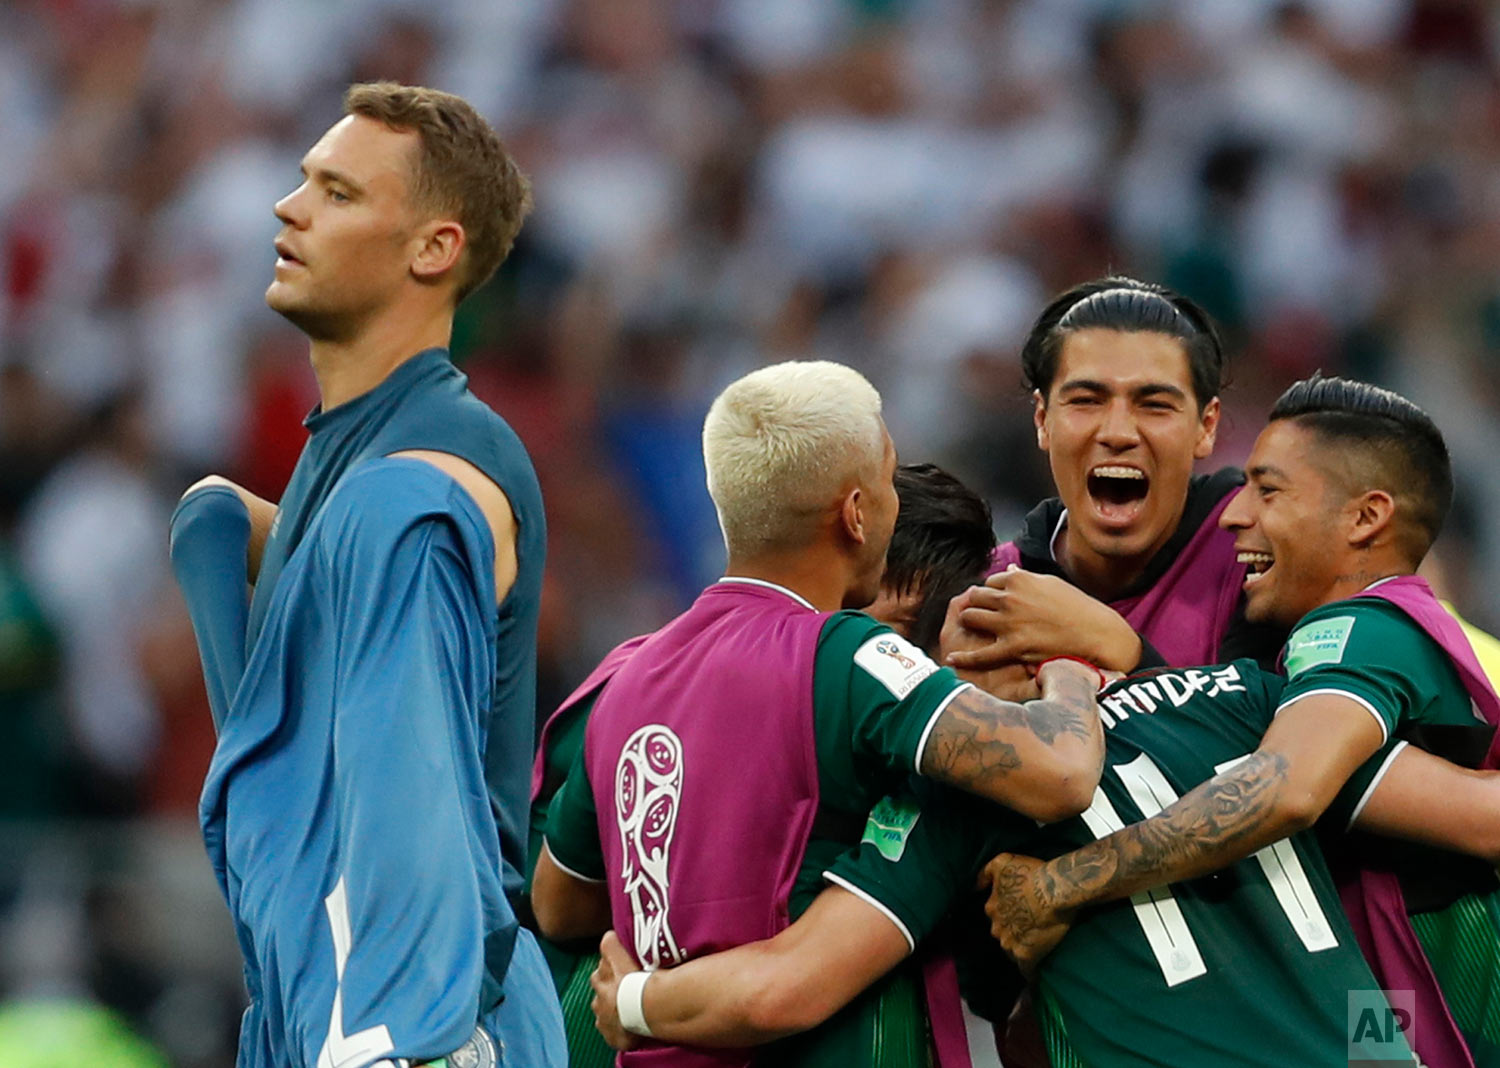  Germany goalkeeper Manuel Neuer walks past as Mexico players celebrate after defeating Germany 1-0 in their group F match at the 2018 soccer World Cup in the Luzhniki Stadium in Moscow, Russia, Sunday, June 17, 2018. (AP Photo/Eduardo Verdugo) 